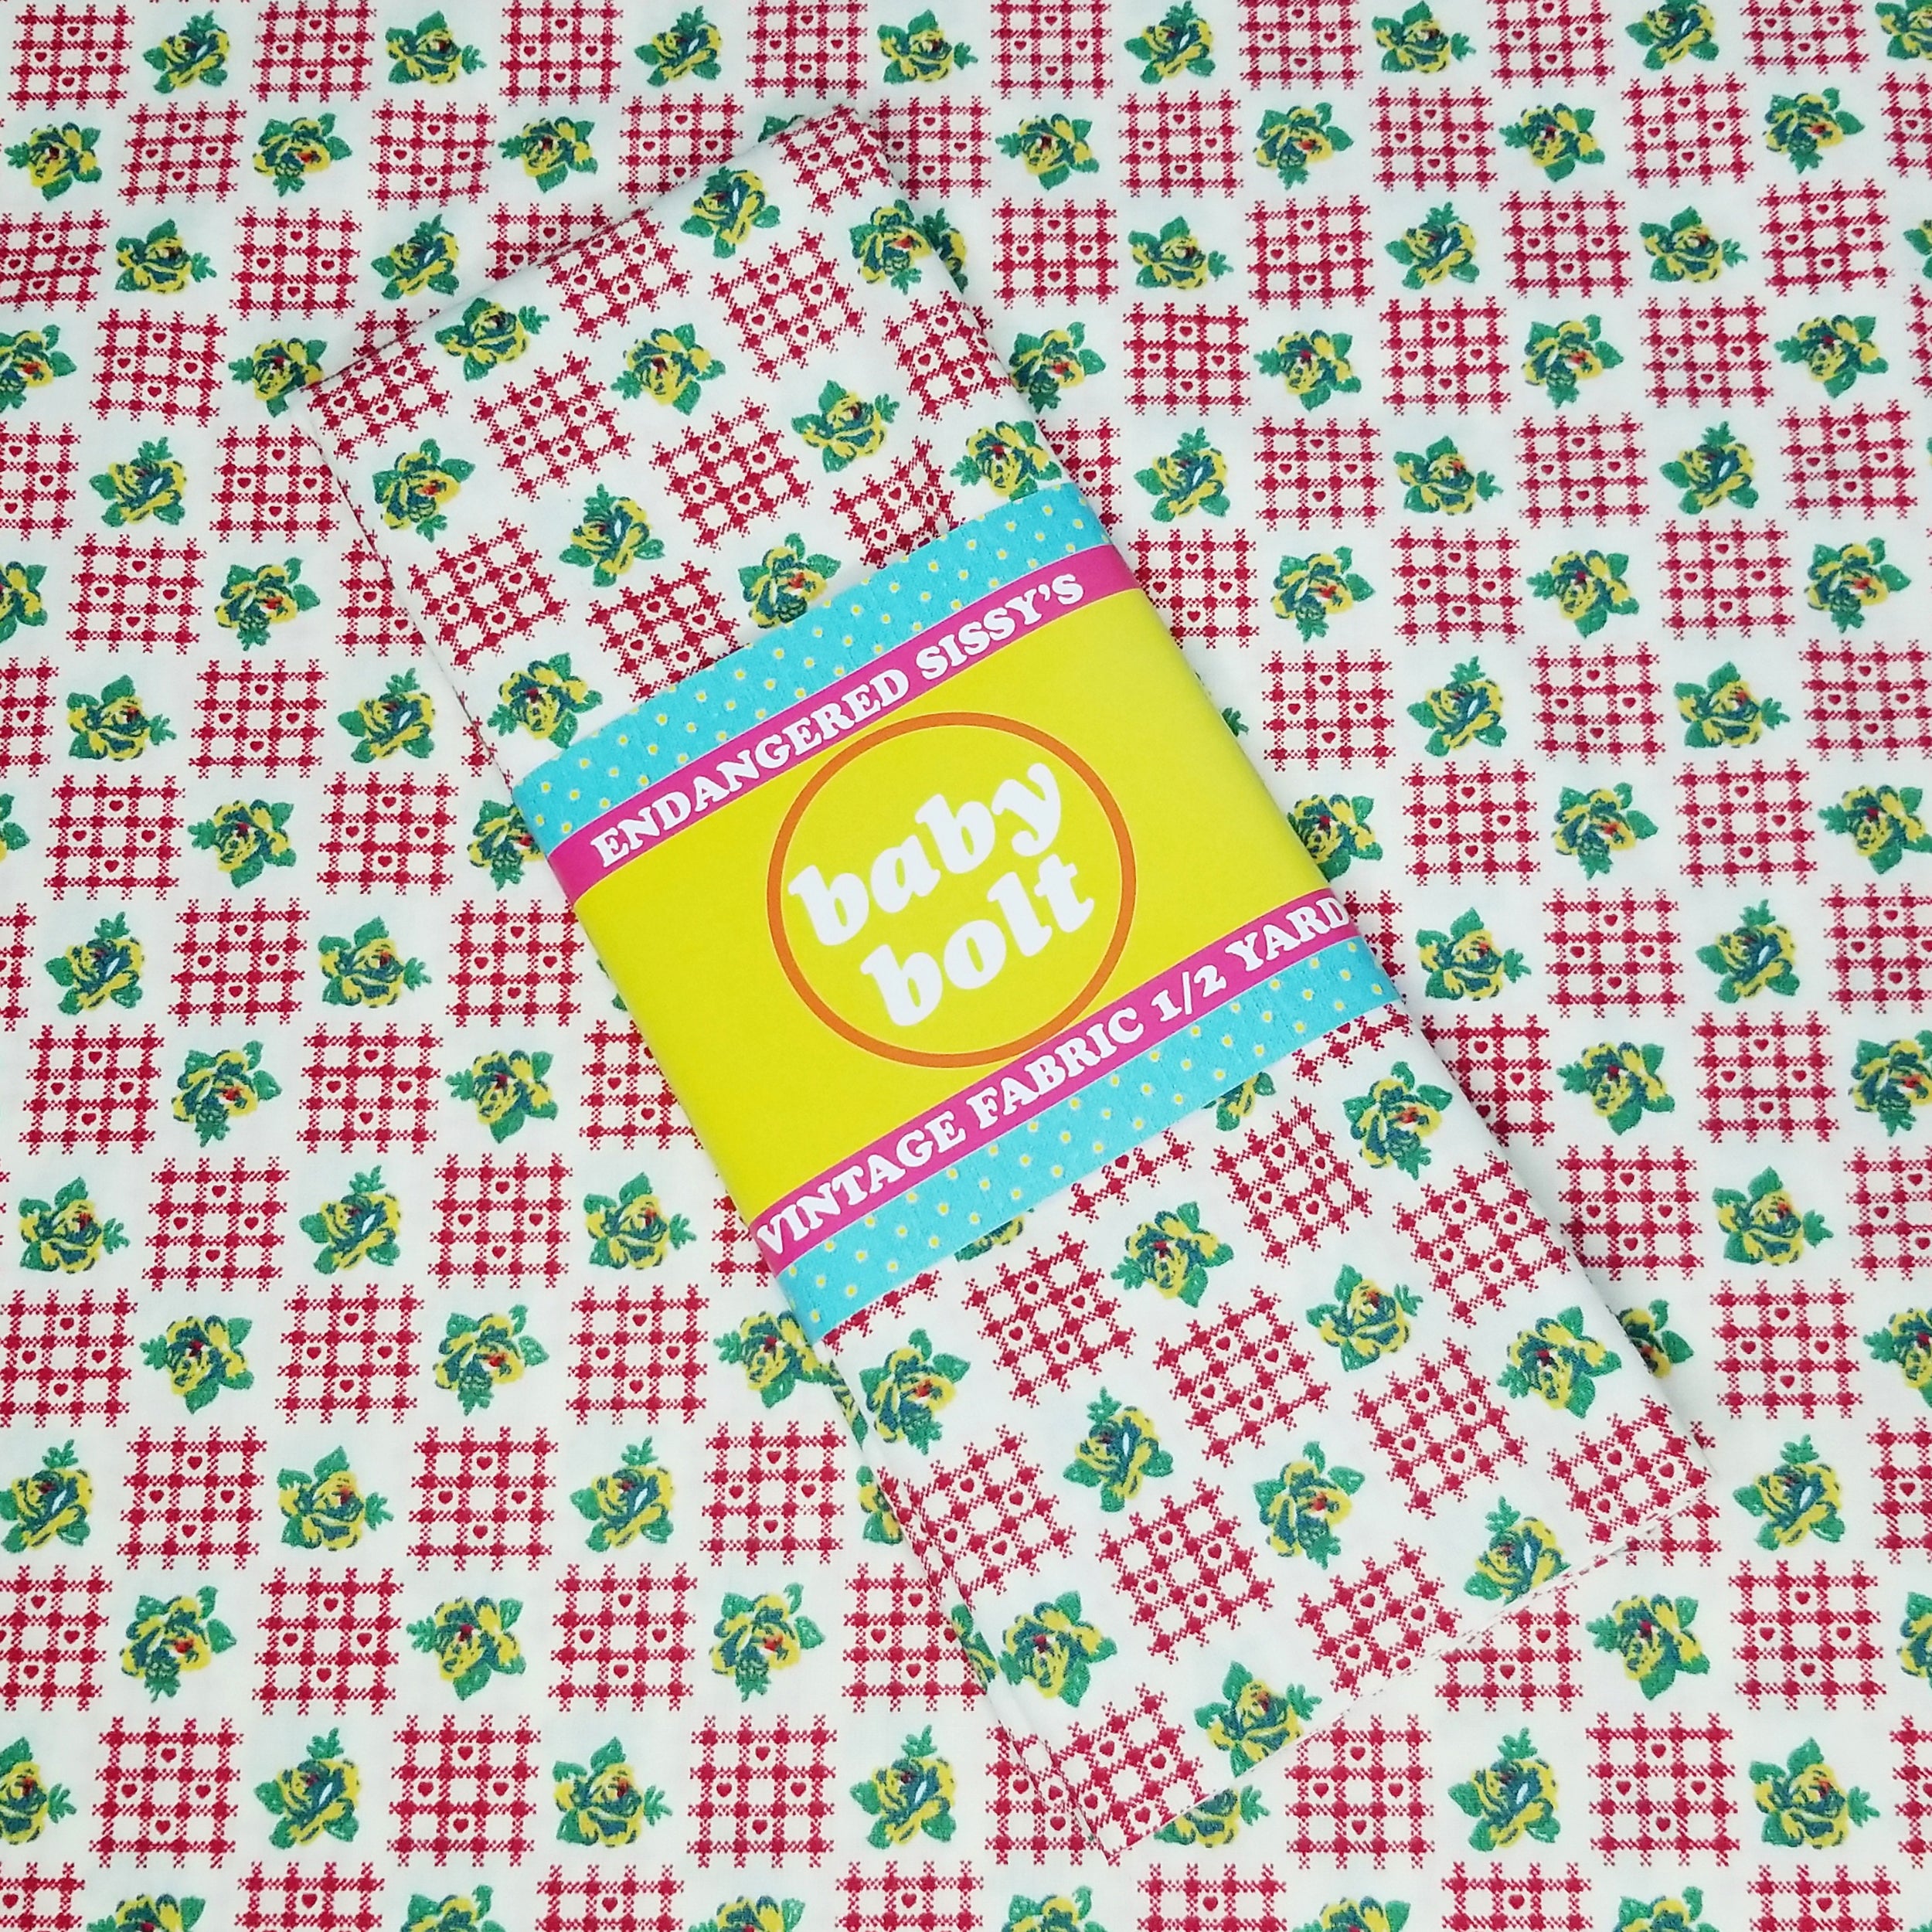 VINTAGE FABRIC BABY BOLT HALF-YARD -  EIGHTIES' HEARTS & FLOWERS PRINT IN RED, GREEN, YELLOW & WHITE